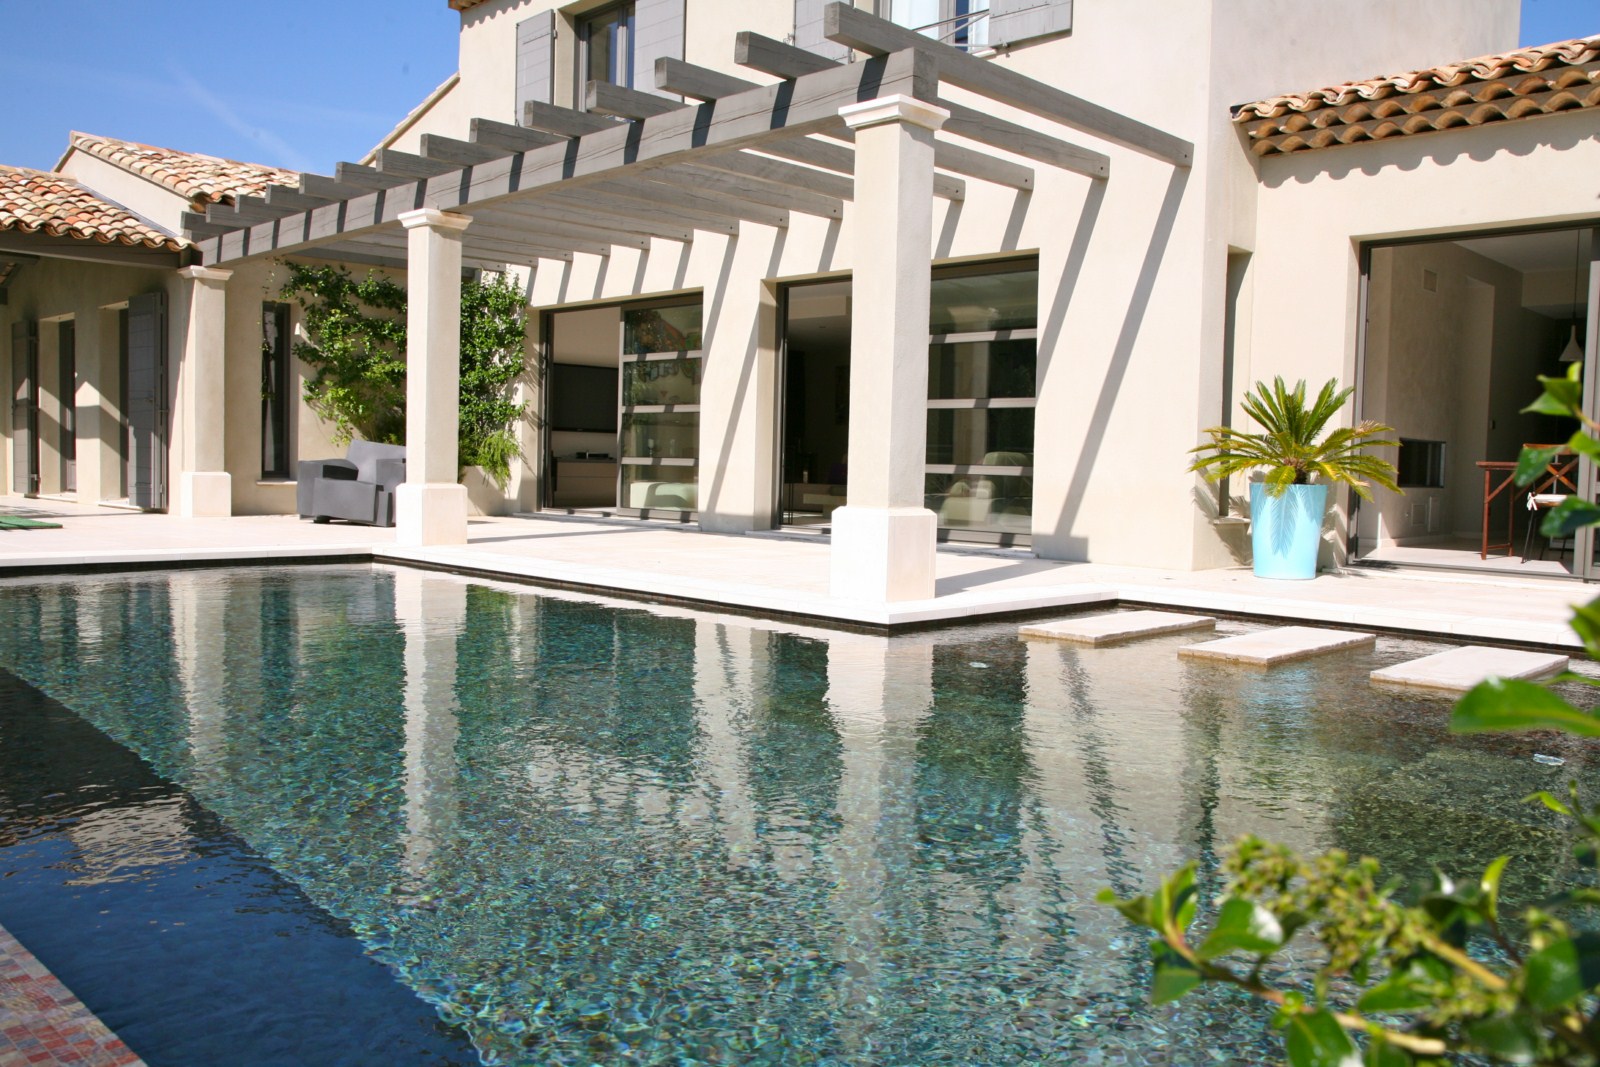 Villa with 4 bedrooms located in the Pont Royal Golf domain